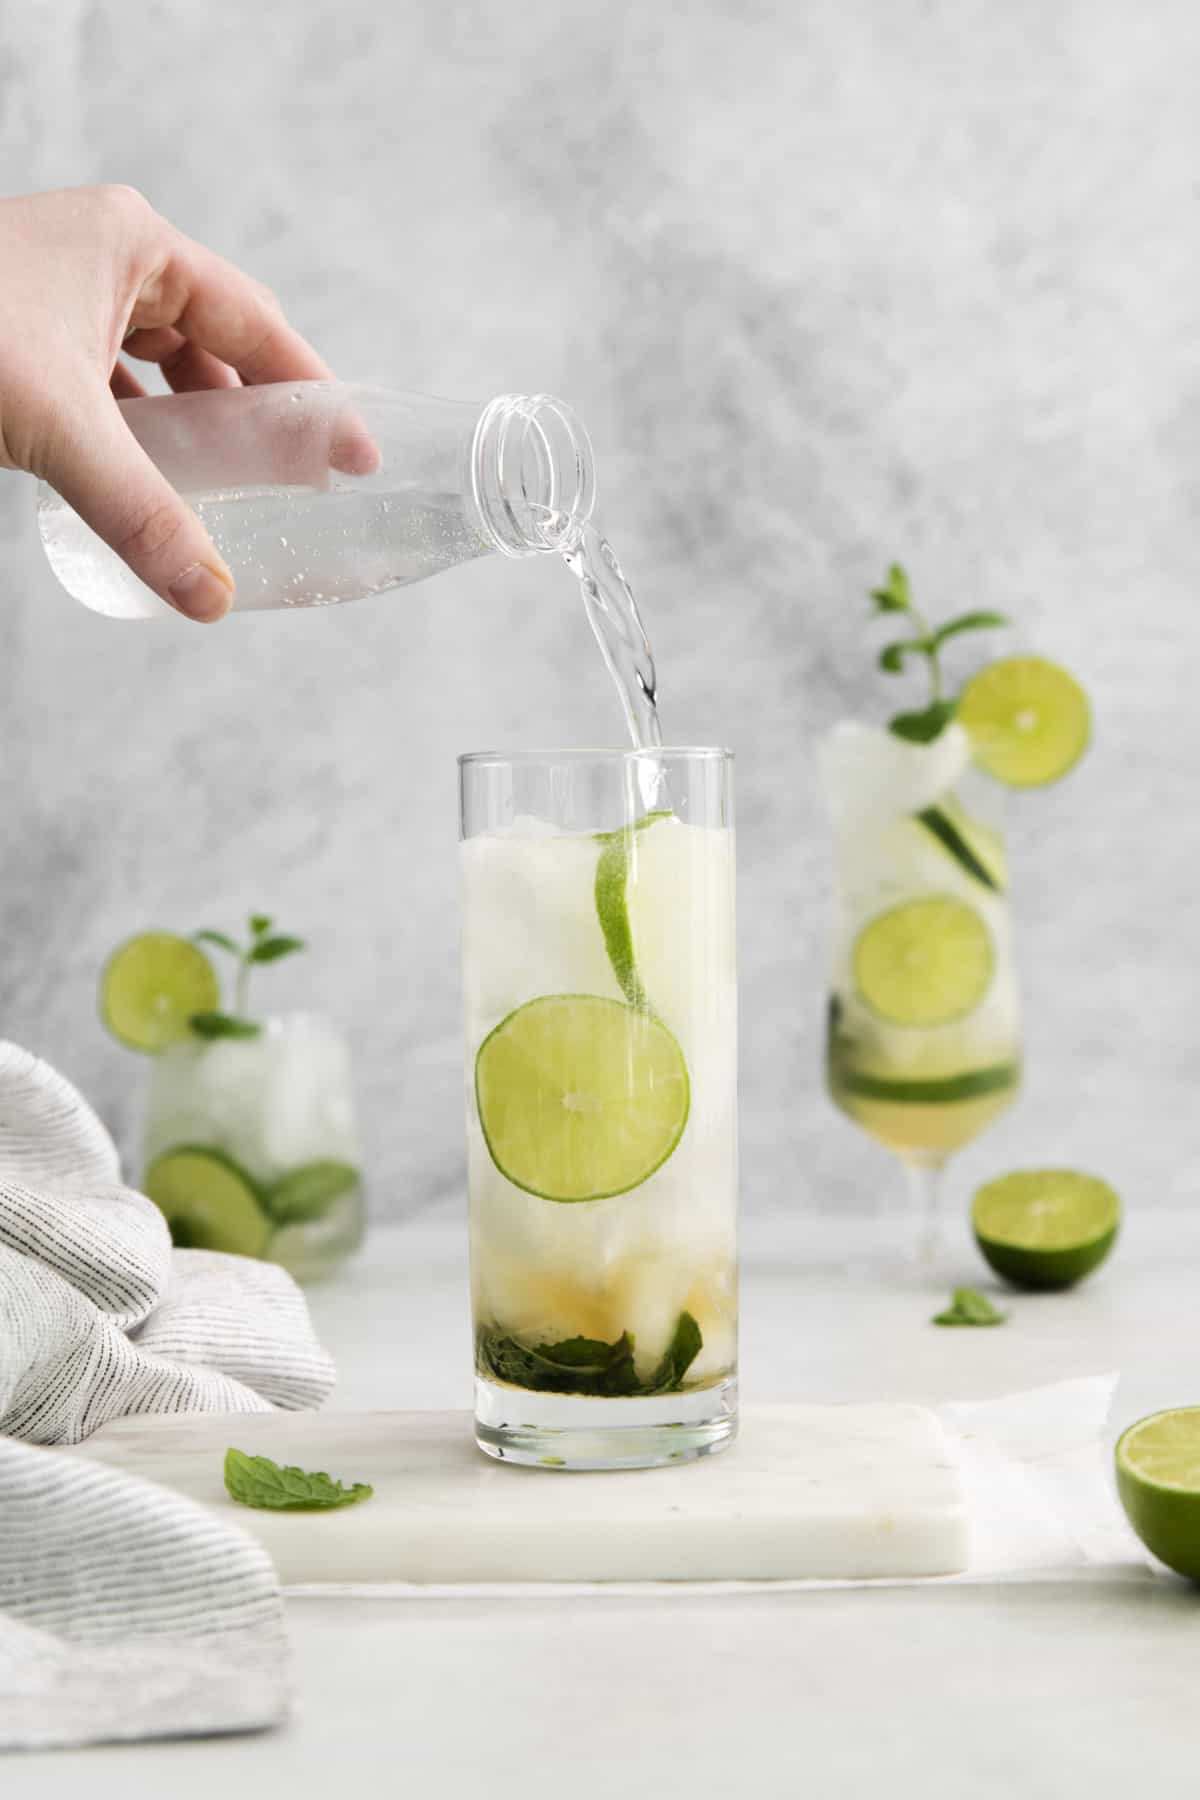 soda water being poured into a glass with mojito ingredients.